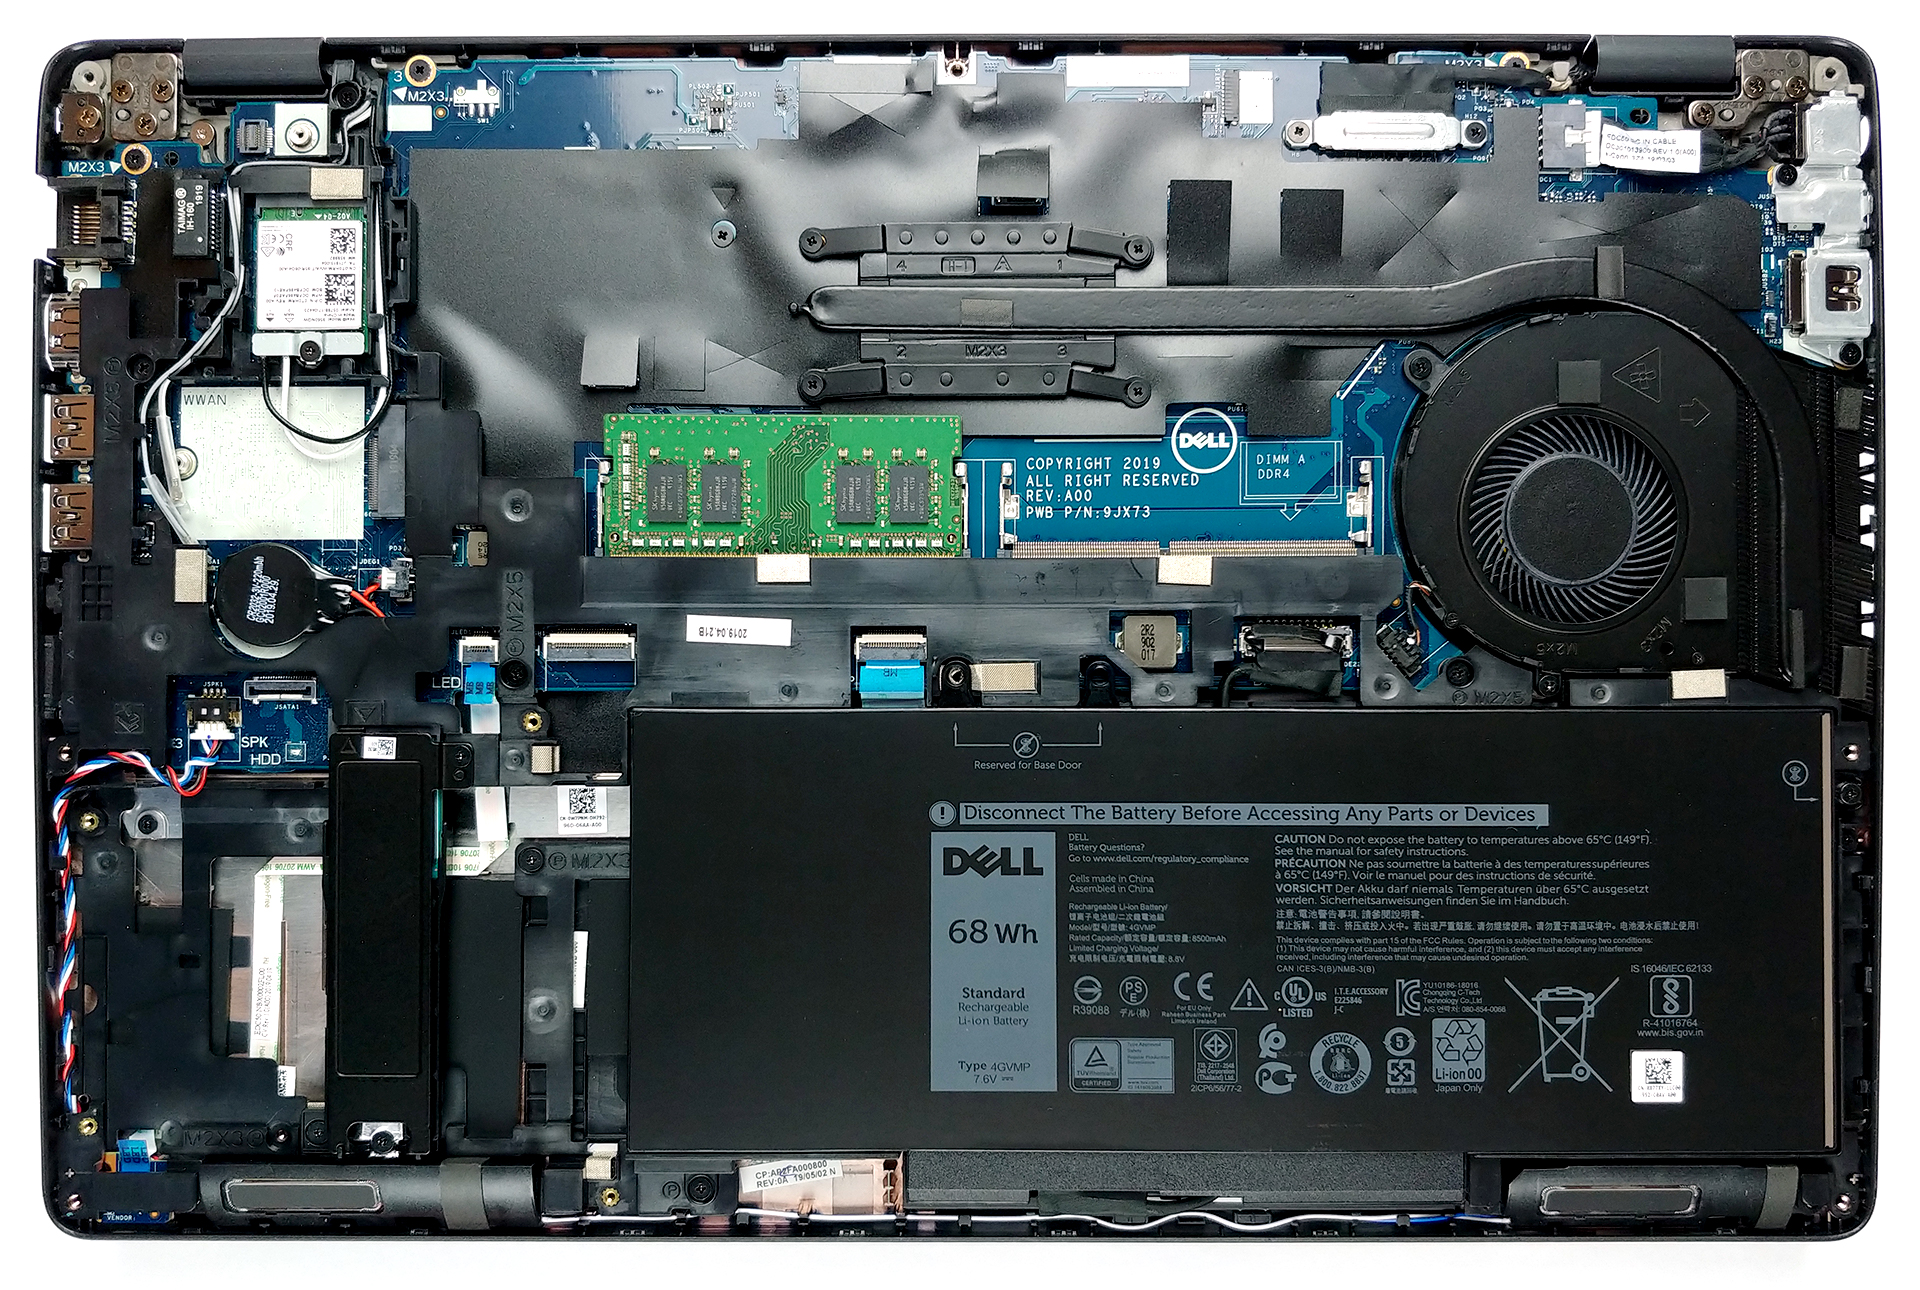 Inside Dell Latitude 5500 - disassembly and upgrade options |  